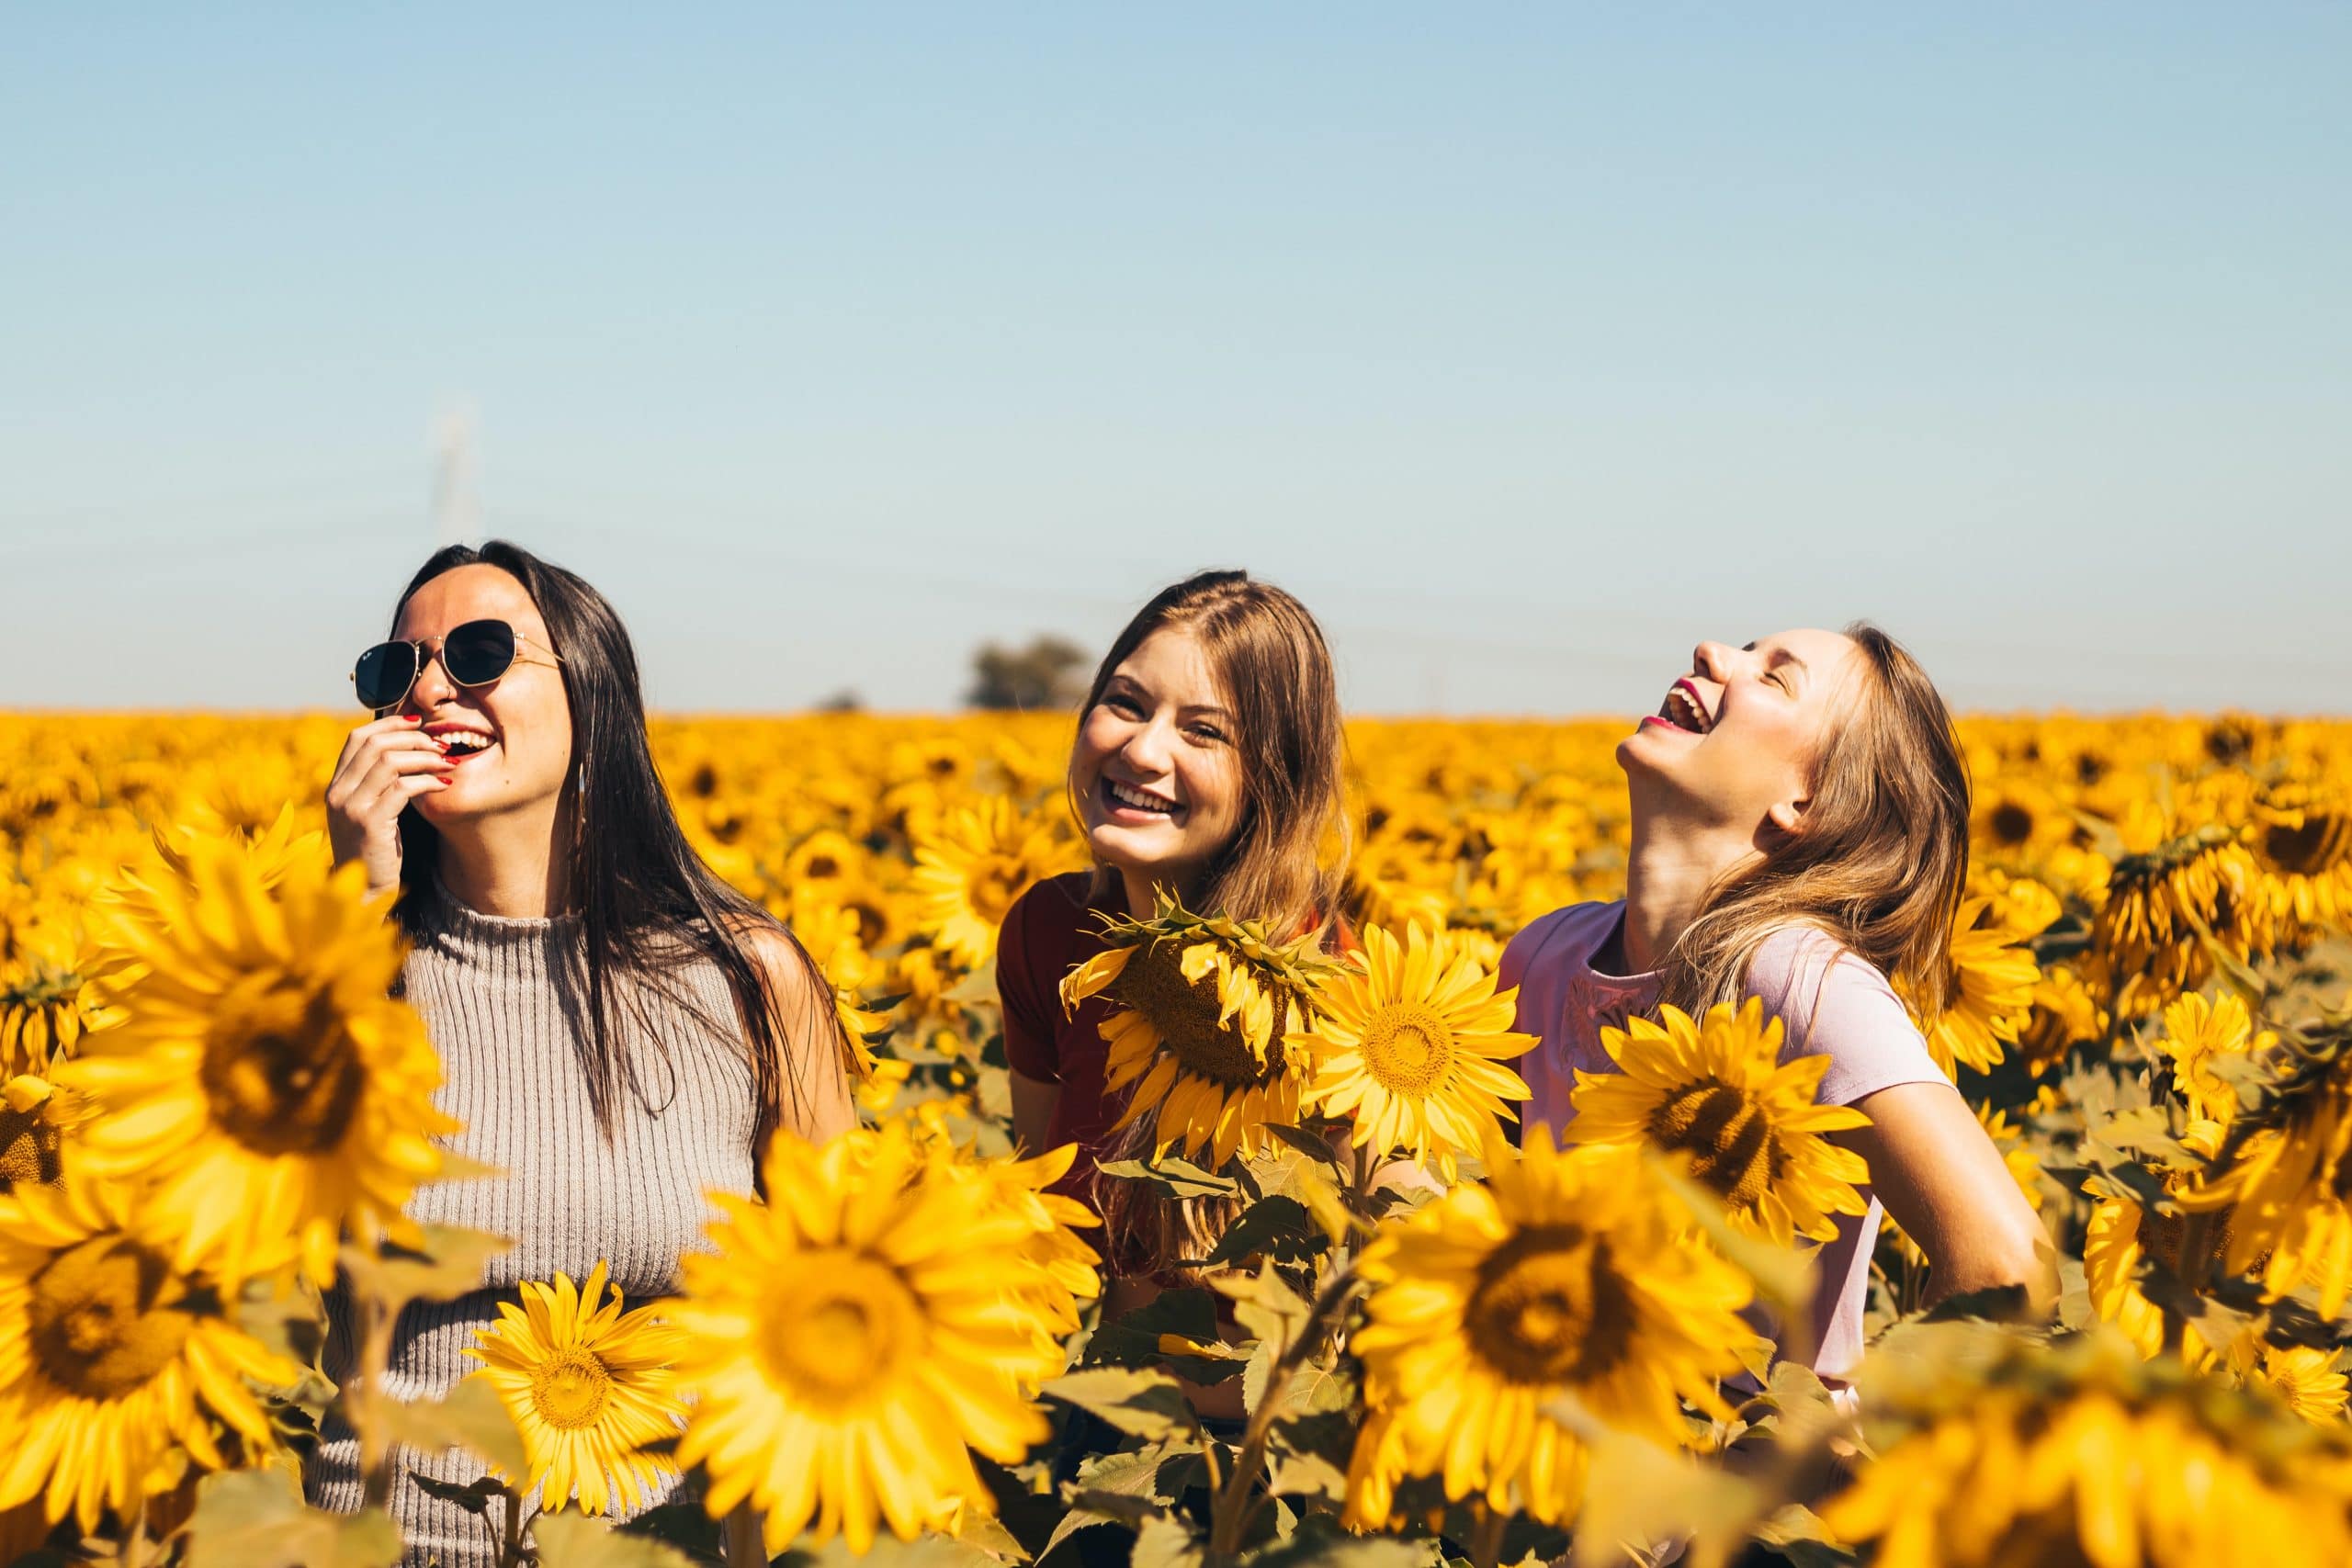 Three Young Women Laugh In A Sunflower Field. Bladder Control Treatments Can Give You Back A Sense Of Freedom.